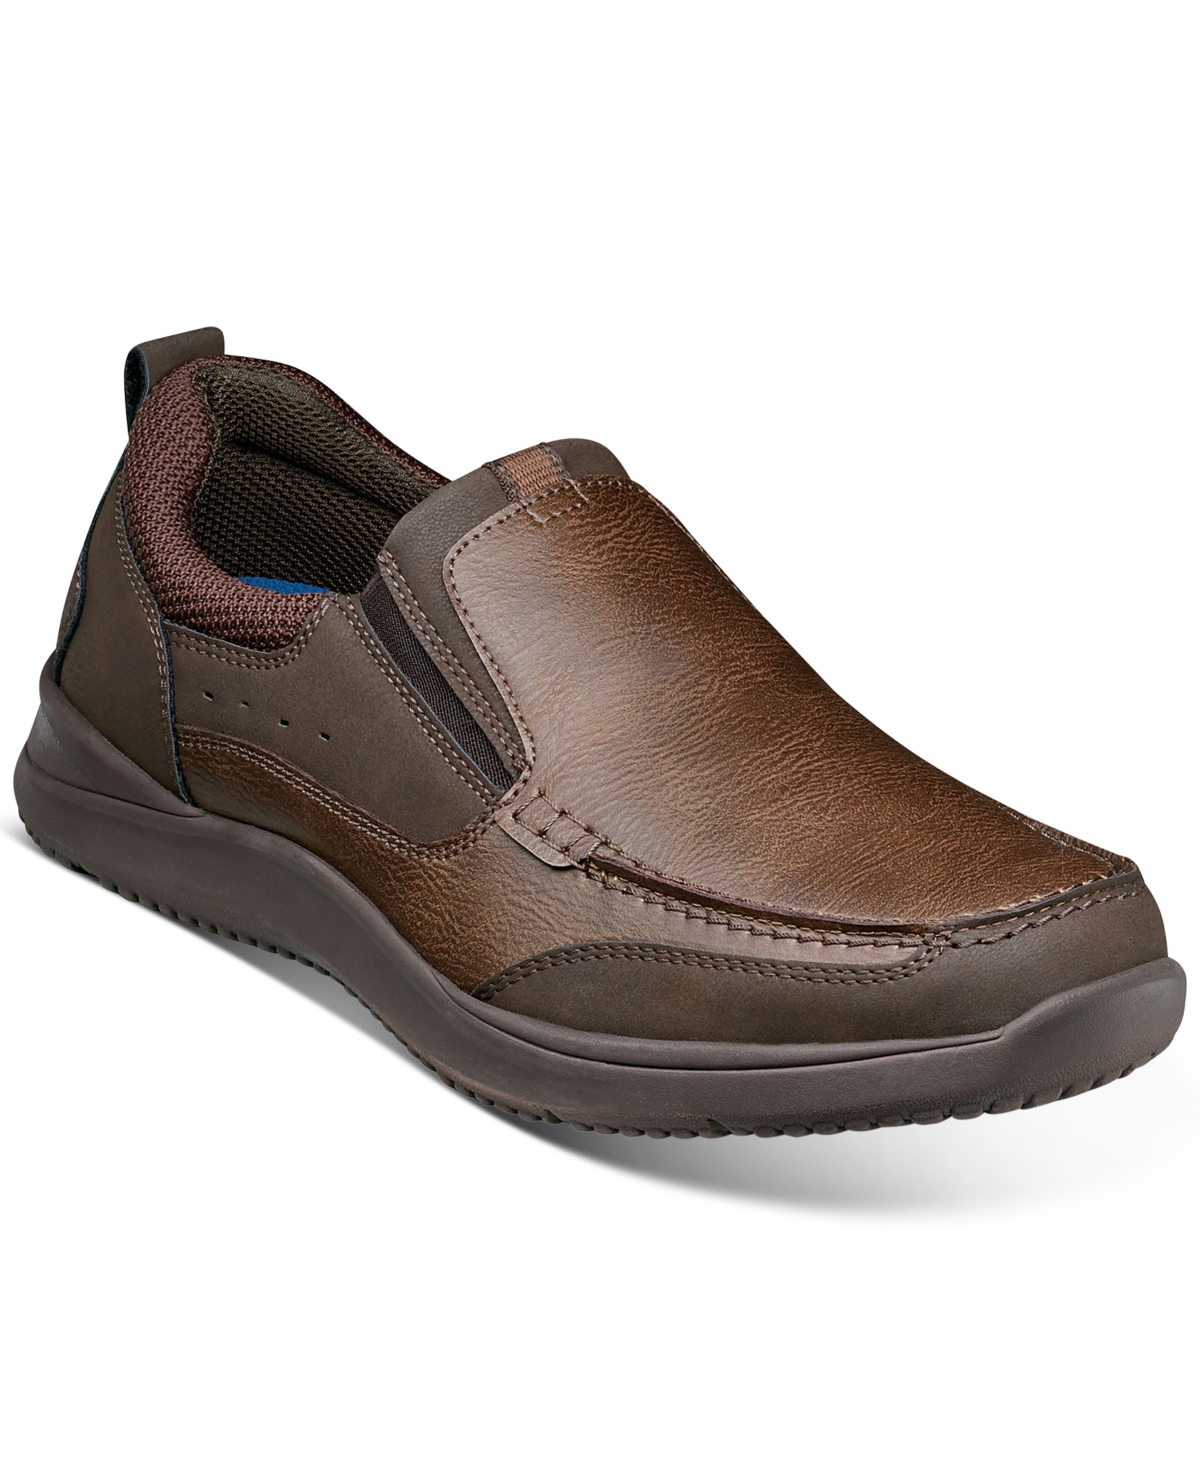 Men's Conway Loafers - Tan